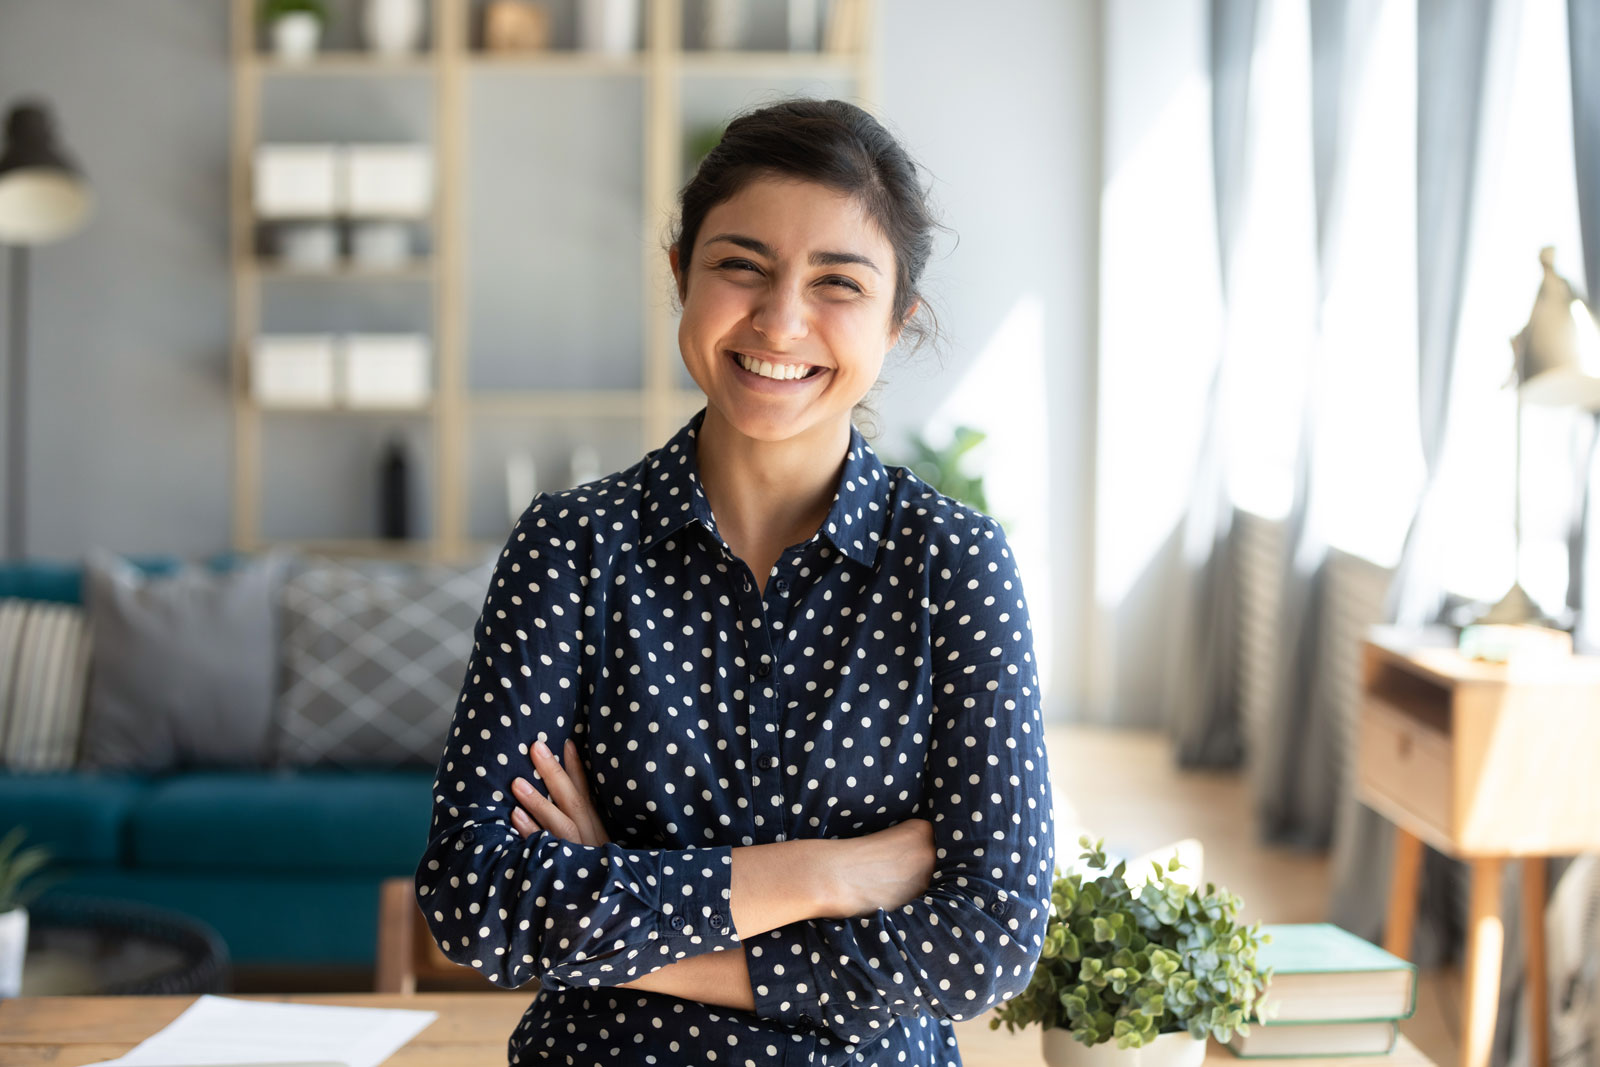 Smiling pretty young adult indian woman looking at camera posing at modern home arms crossed, cheerful happy ethnic girl student self employed lady laughing enjoying distance job education, portrait